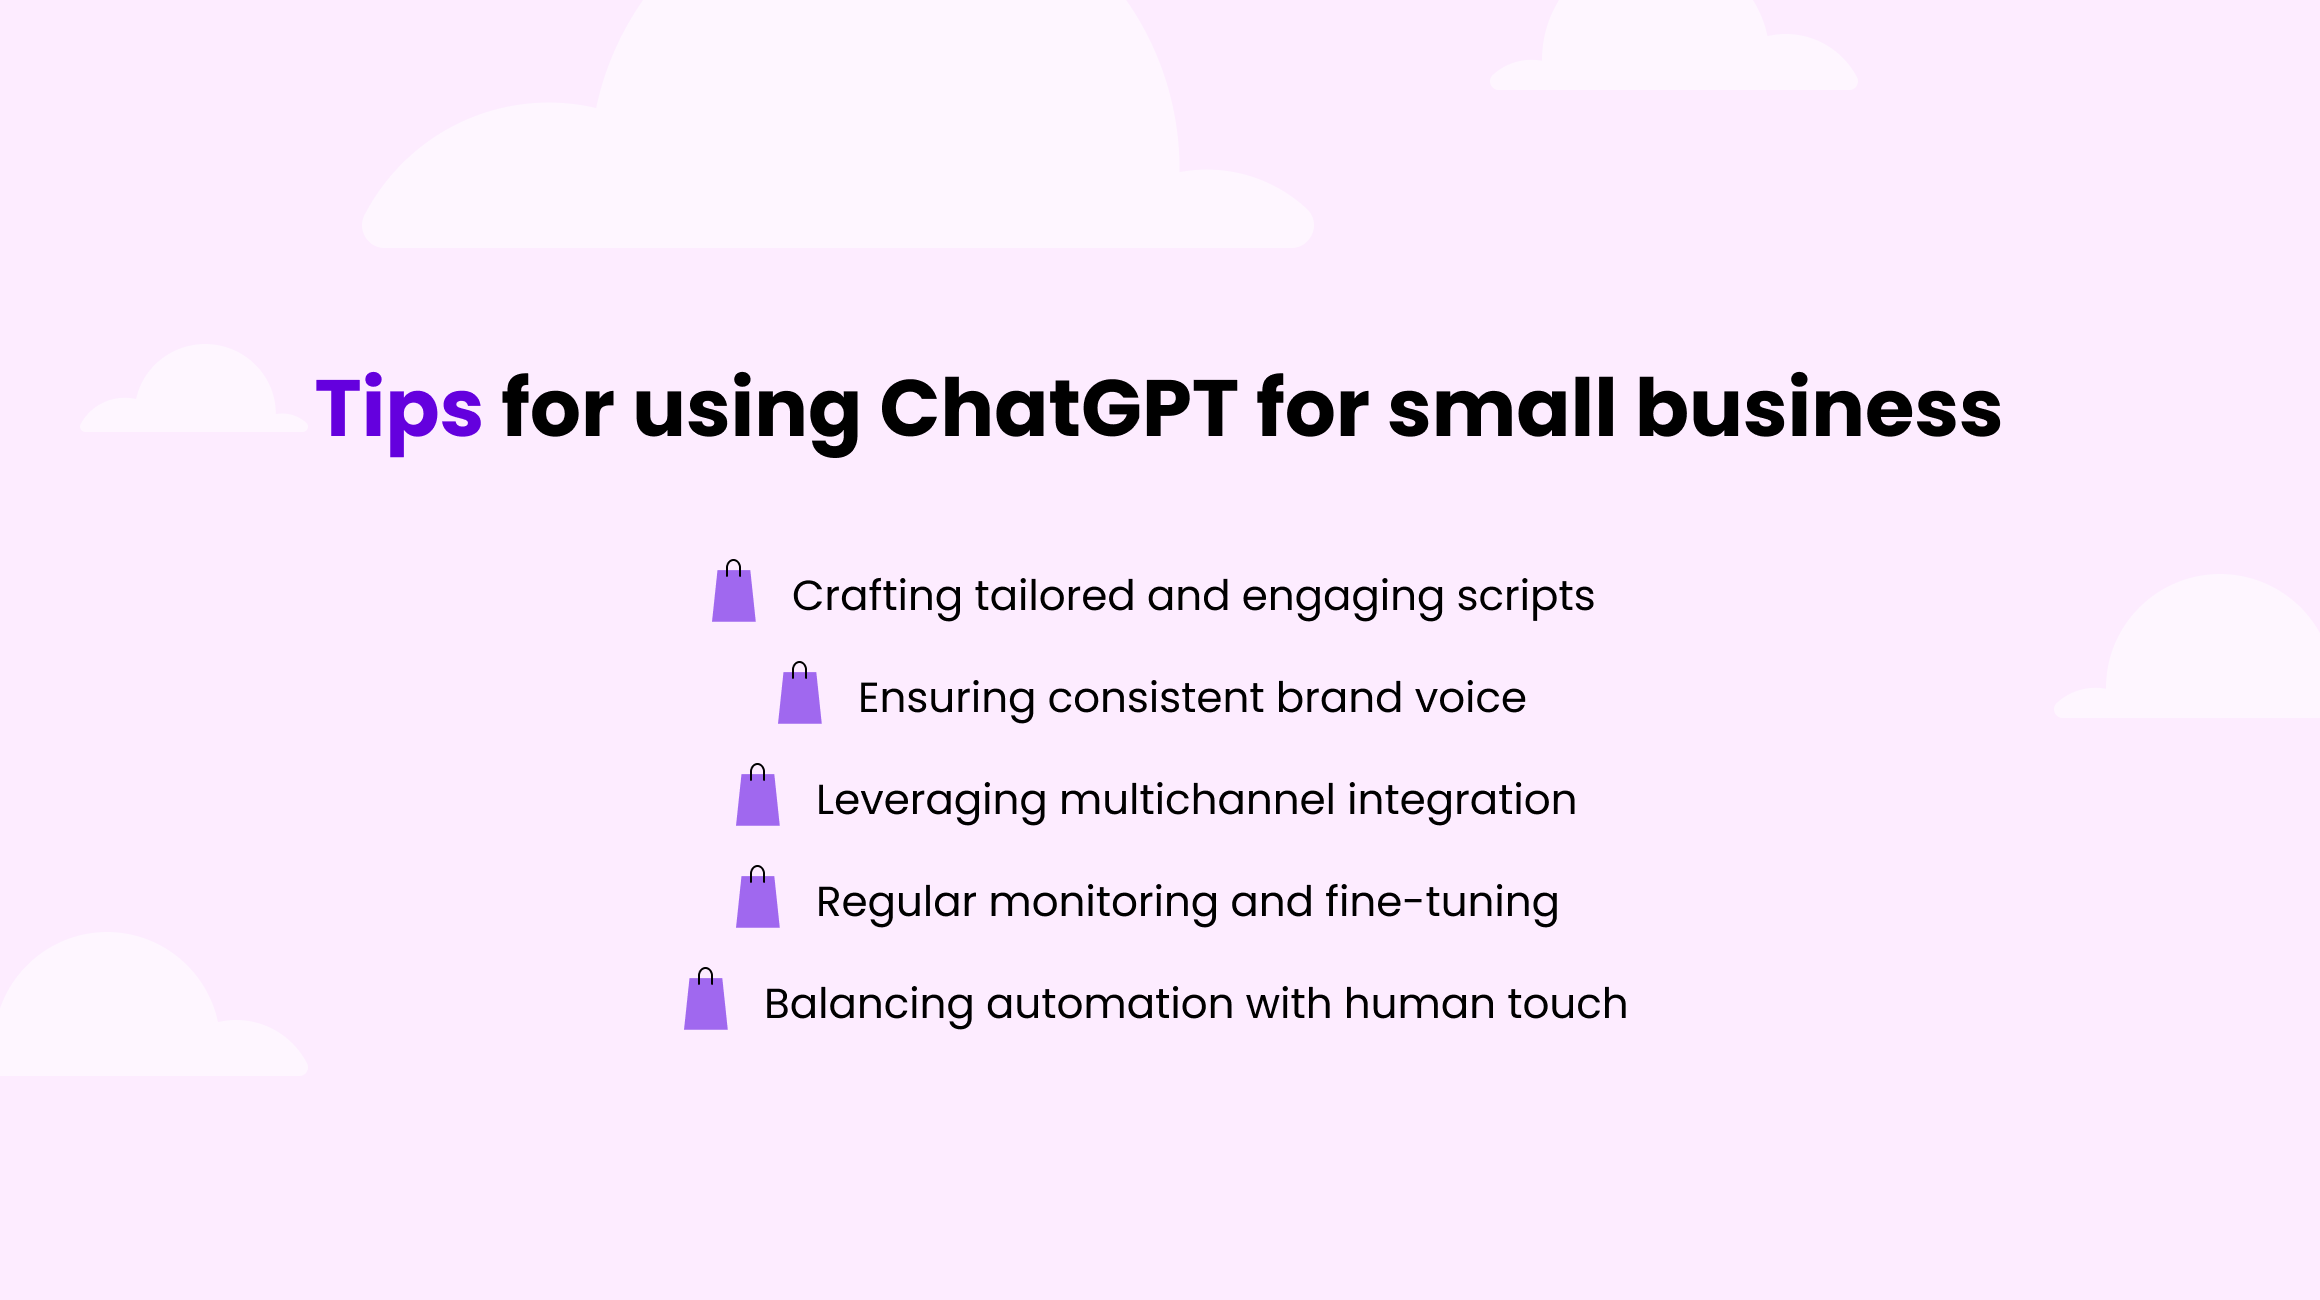 Tips for using ChatGPT for small business